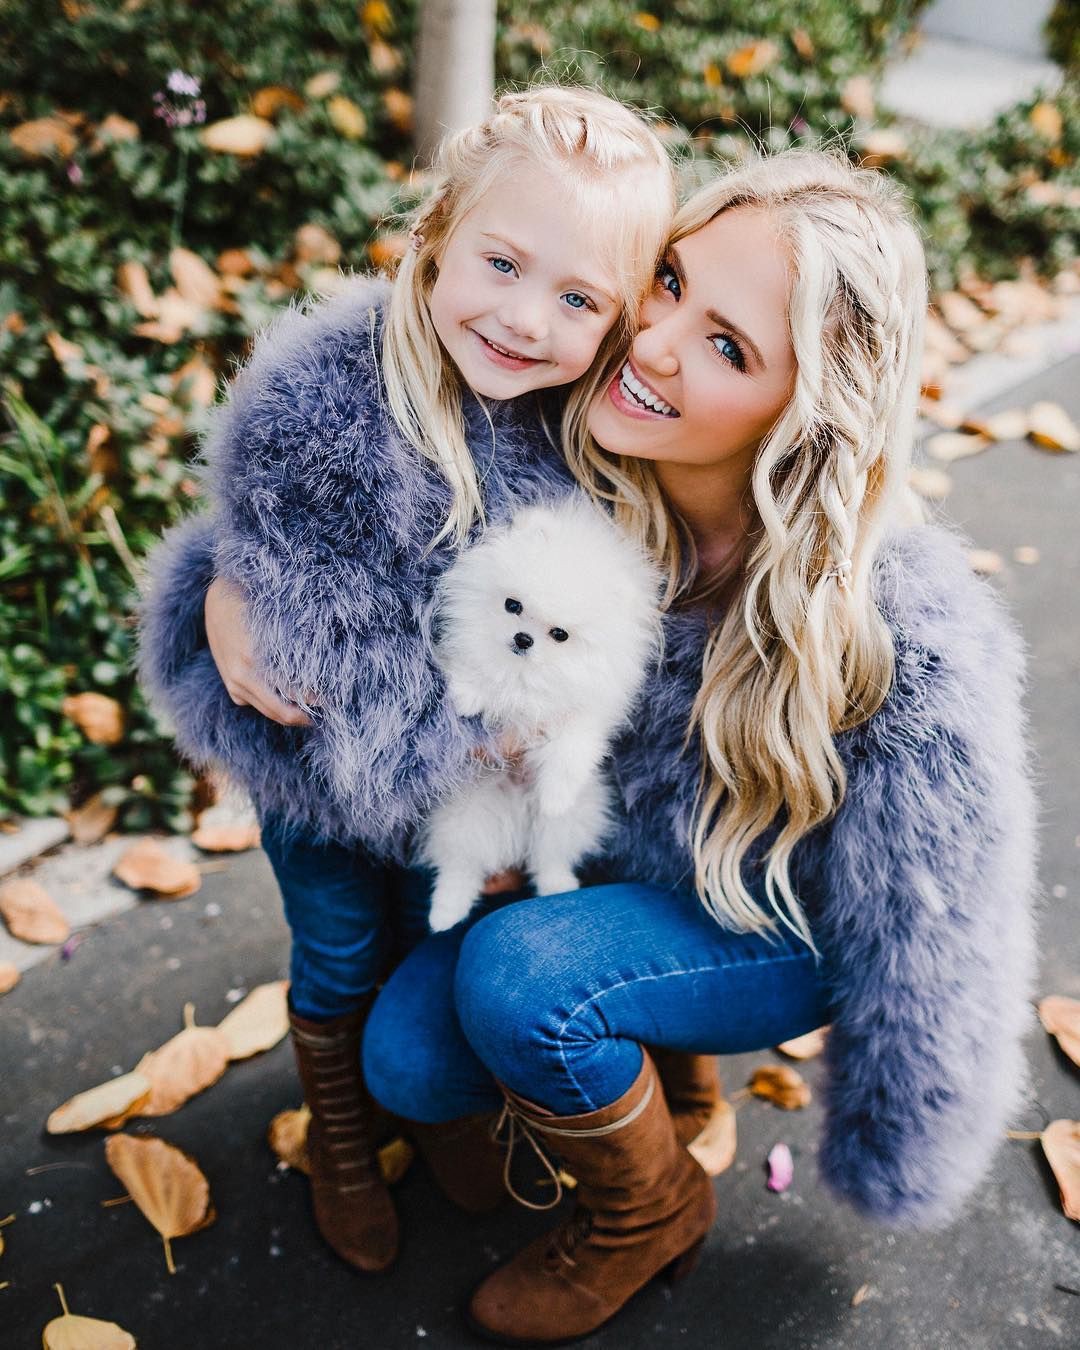 Birthday Mother And Daughter Dresses: Street Style Plaid Blazer,  Mom And Daughter Matching Clothes,  Mommy And Me Outfits,  Mom Daughter Outfit,  Trendy Mom And Daughter Outfit,  Mom And Kids Matching Outfit  